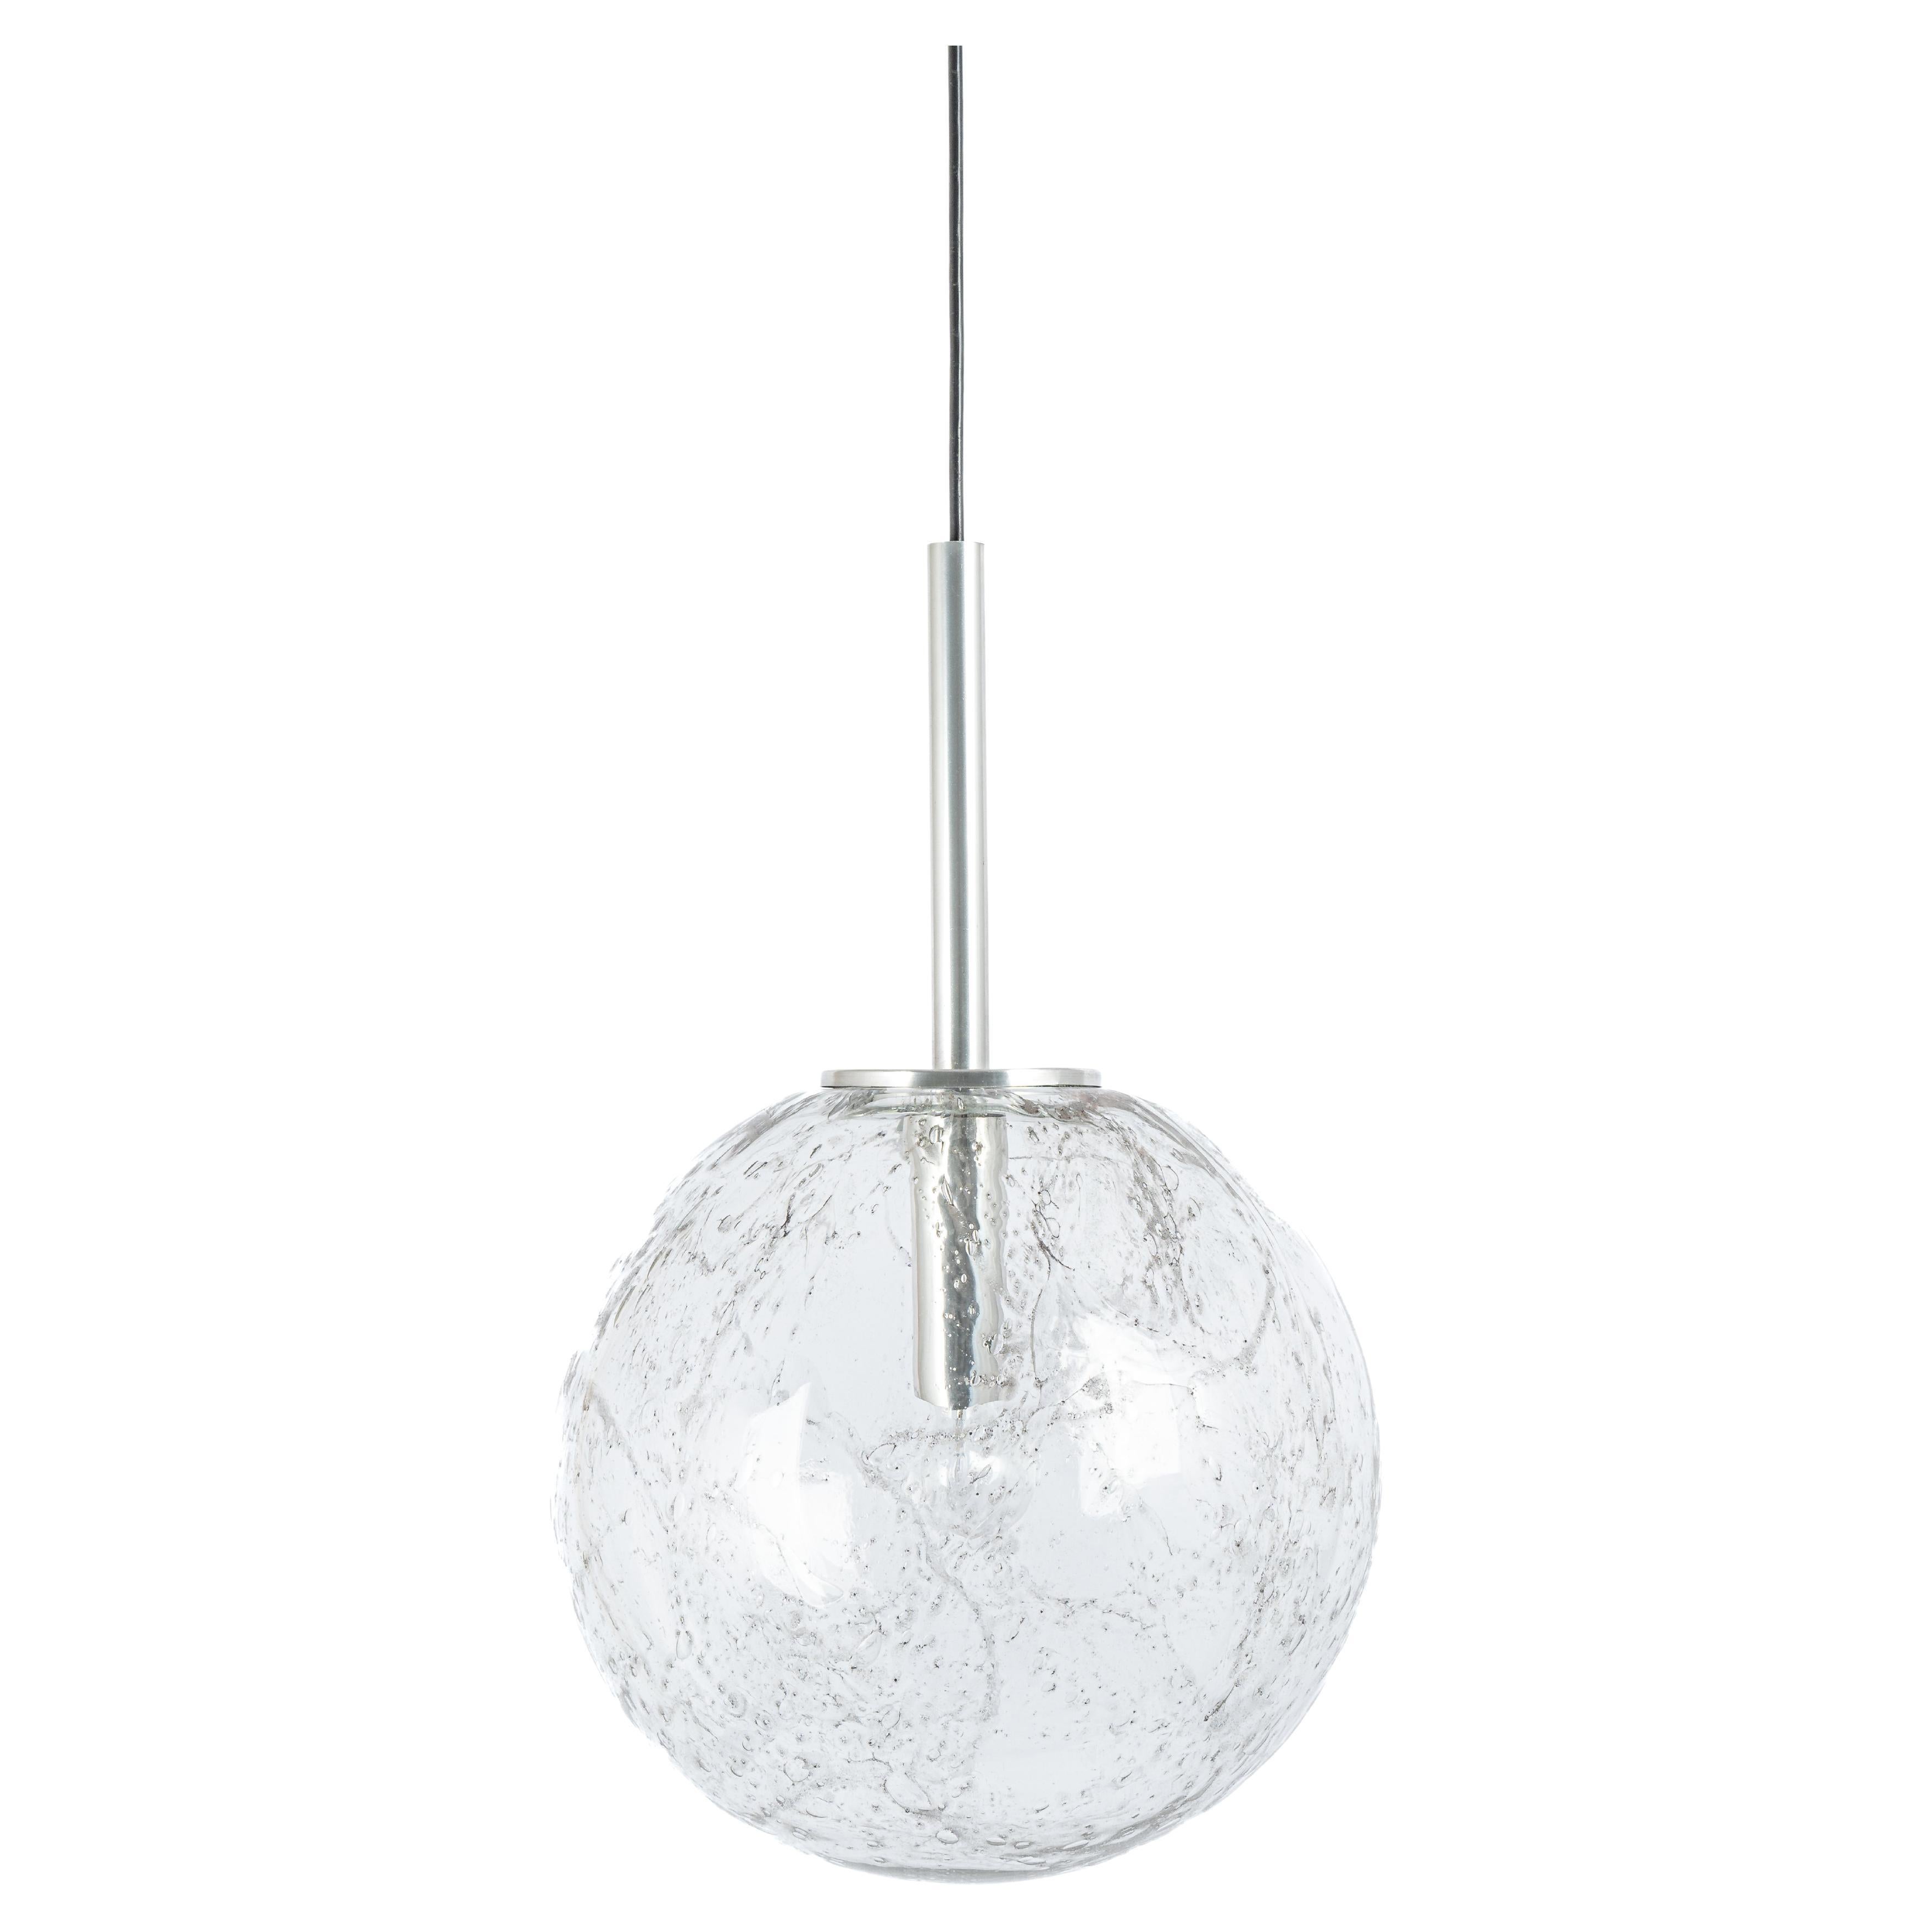 Large Murano Ball Pendant Light by Doria, Germany, 1970s For Sale